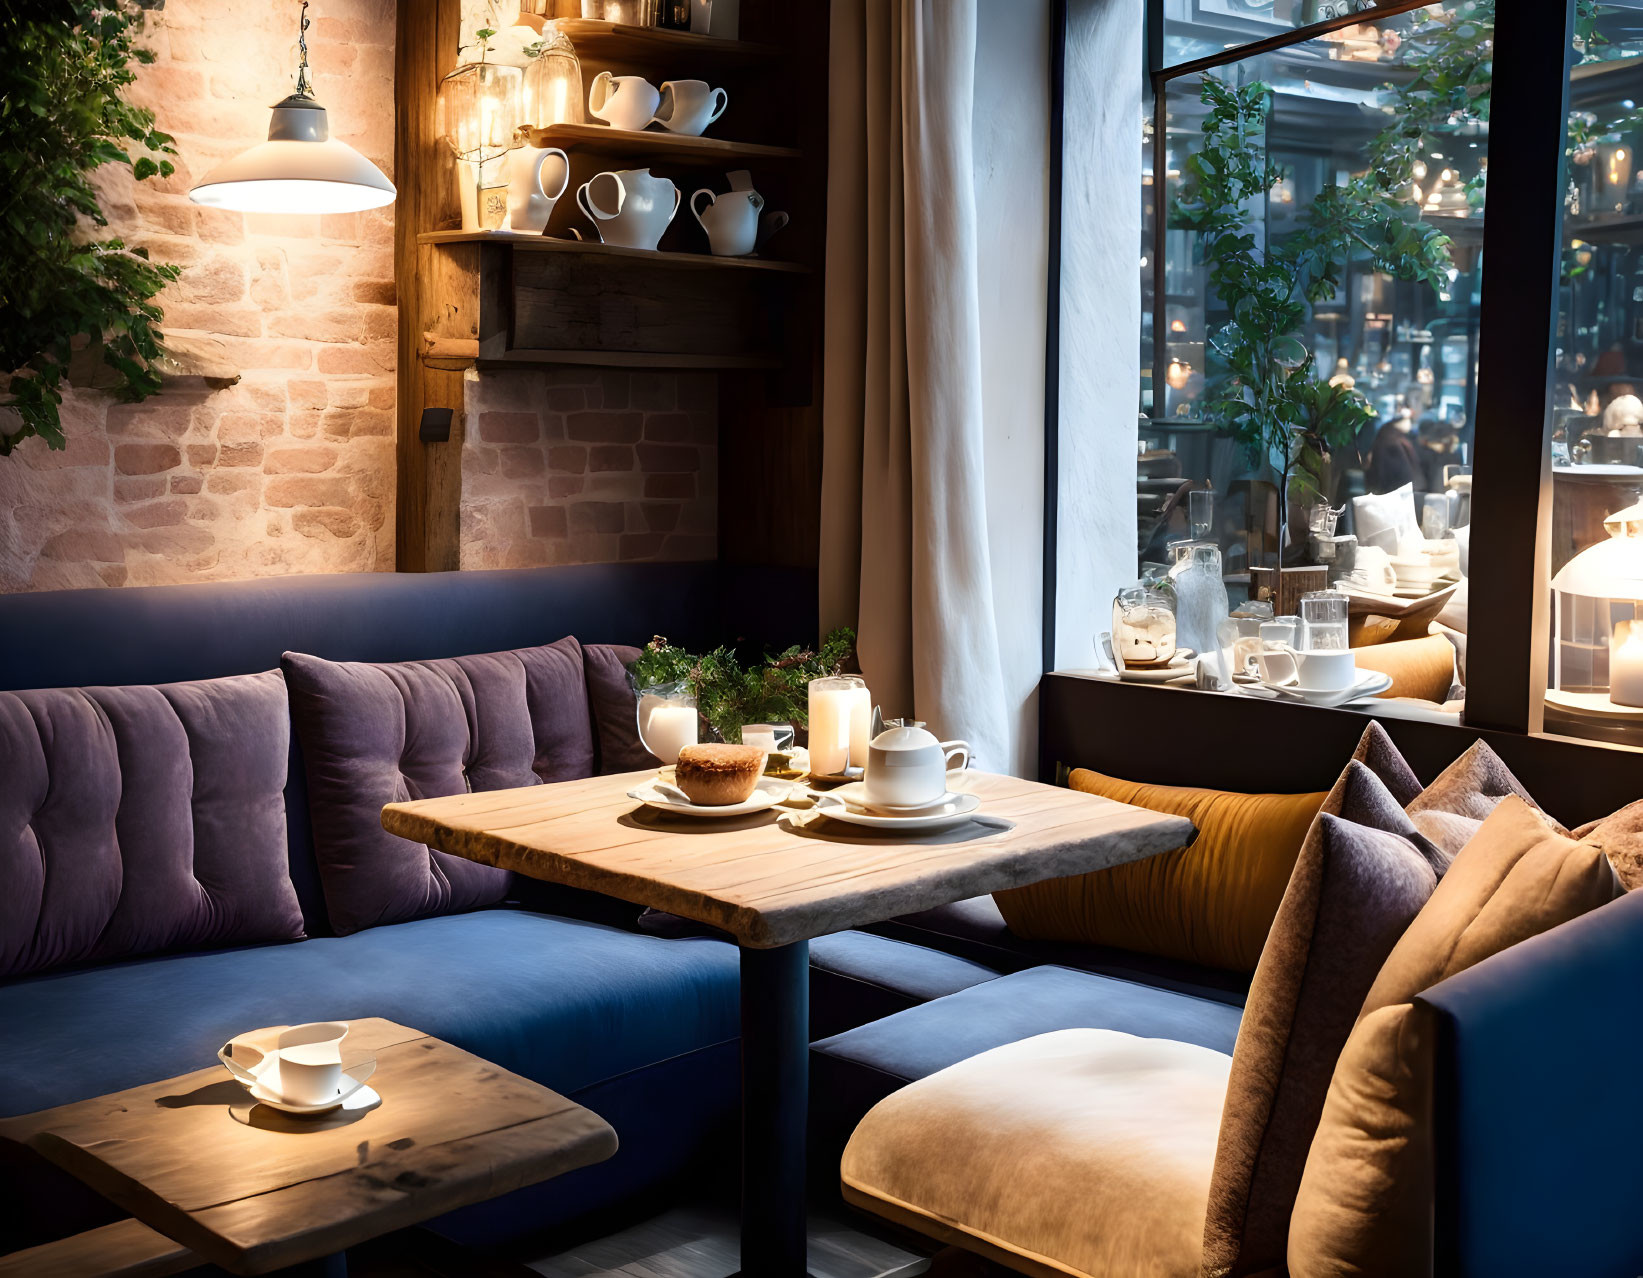 Warmly lit café interior with wooden tables, purple sofa, coffee cups, and decorative shelving